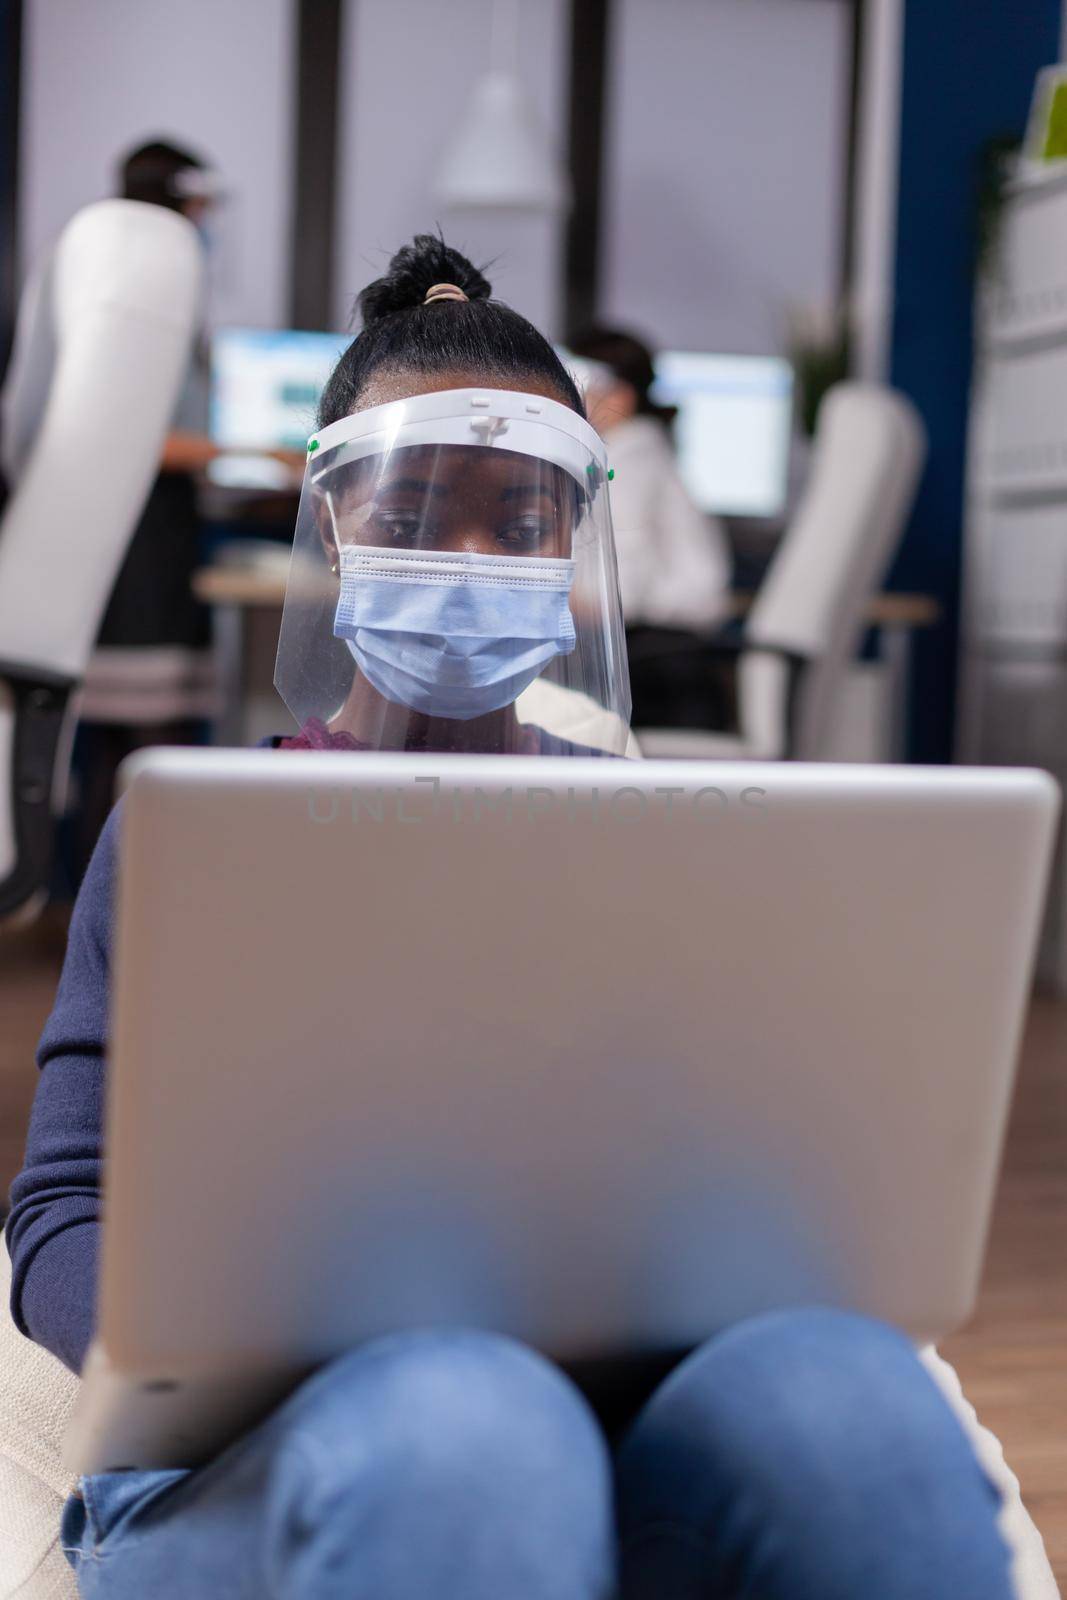 African businesswoman working on laptop wearing face mask against covid19. Multiethnic business team working respecting social distance during global pandemic with coronavirus.